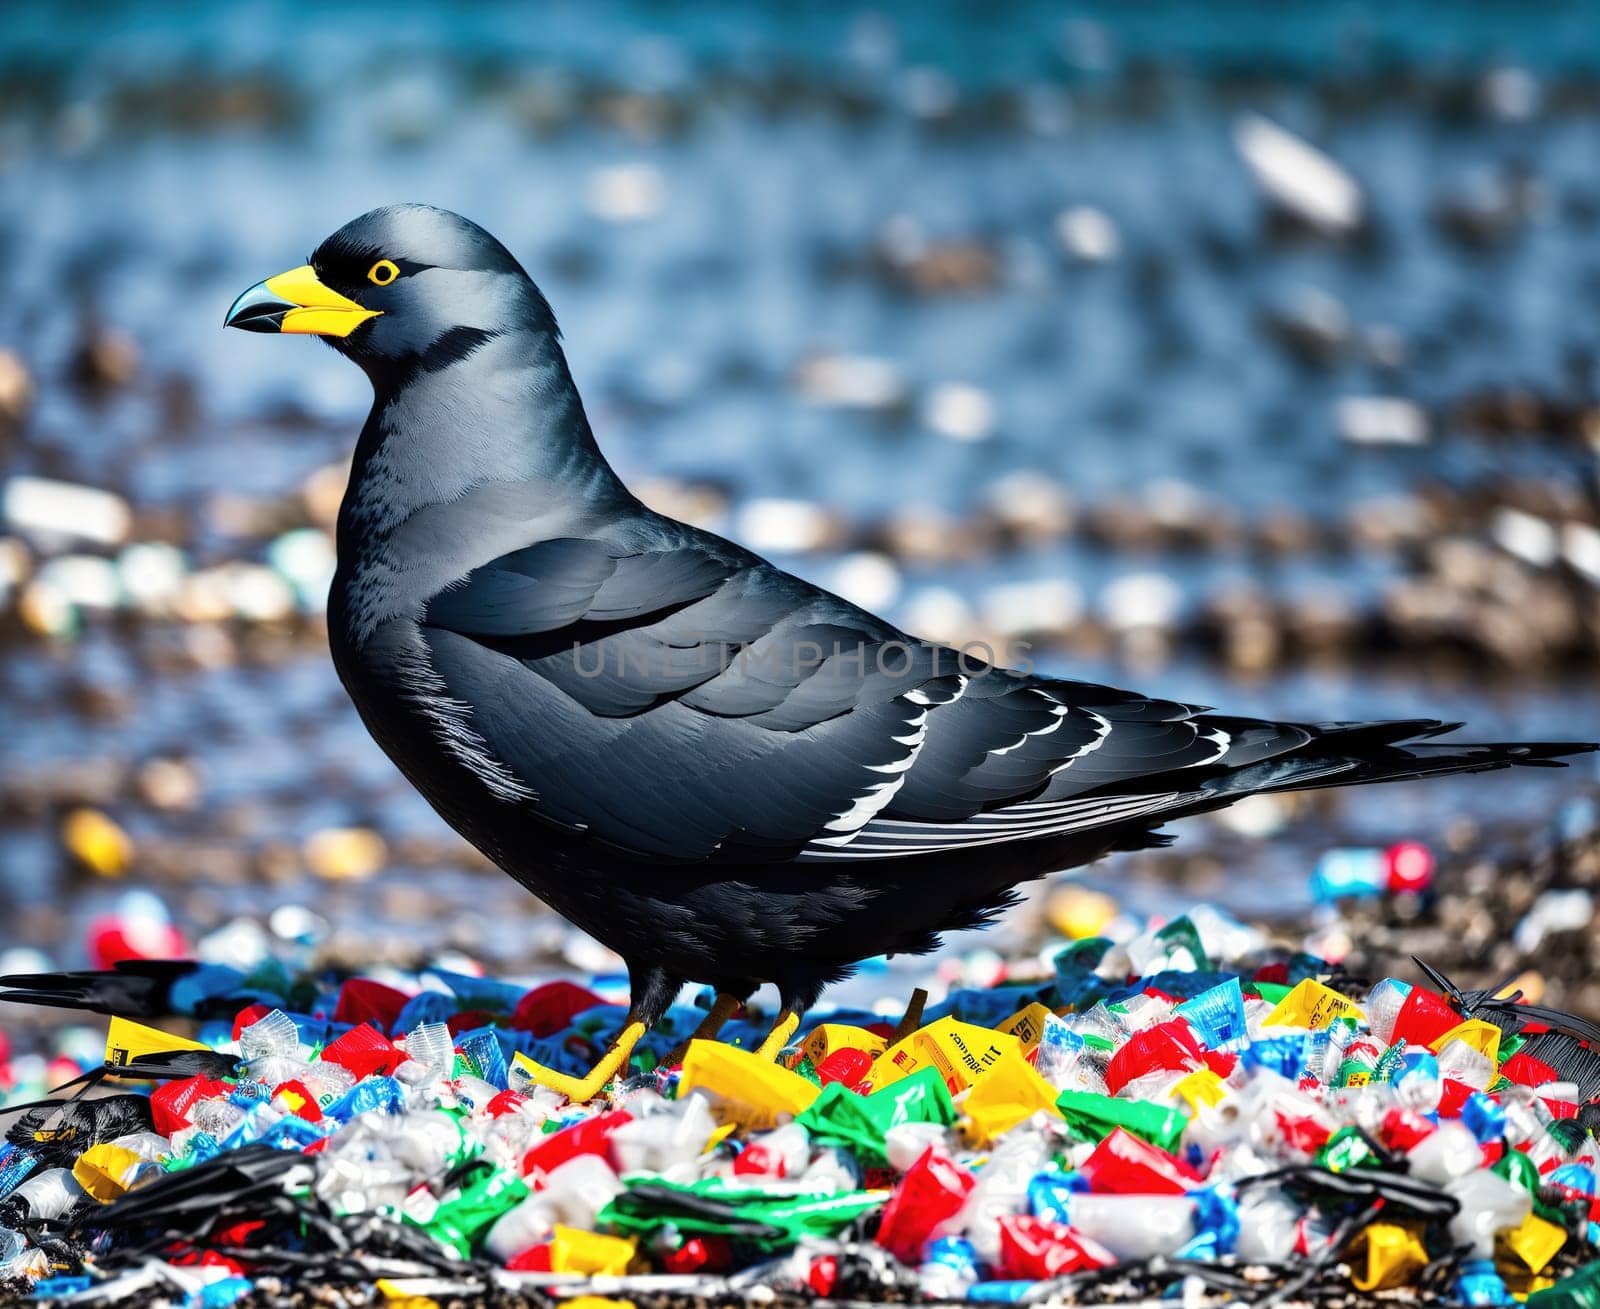 The image shows a black bird standing on top of a pile of plastic bottles and other trash in a beach setting.